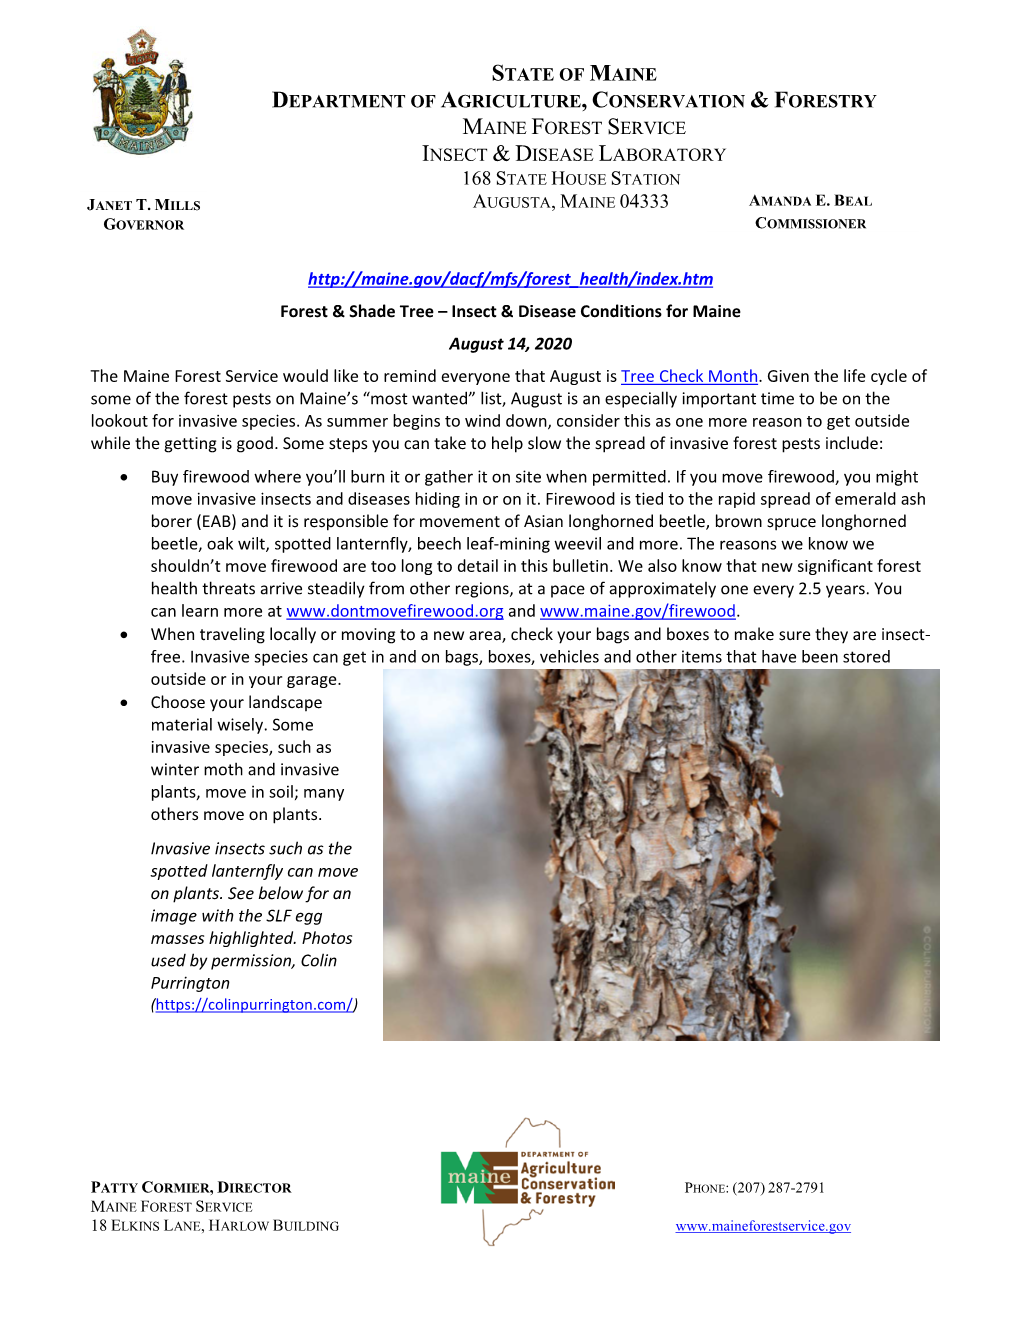 Forest & Shade Tree – Insect & Disease Conditions for Maine: August 14, 2020